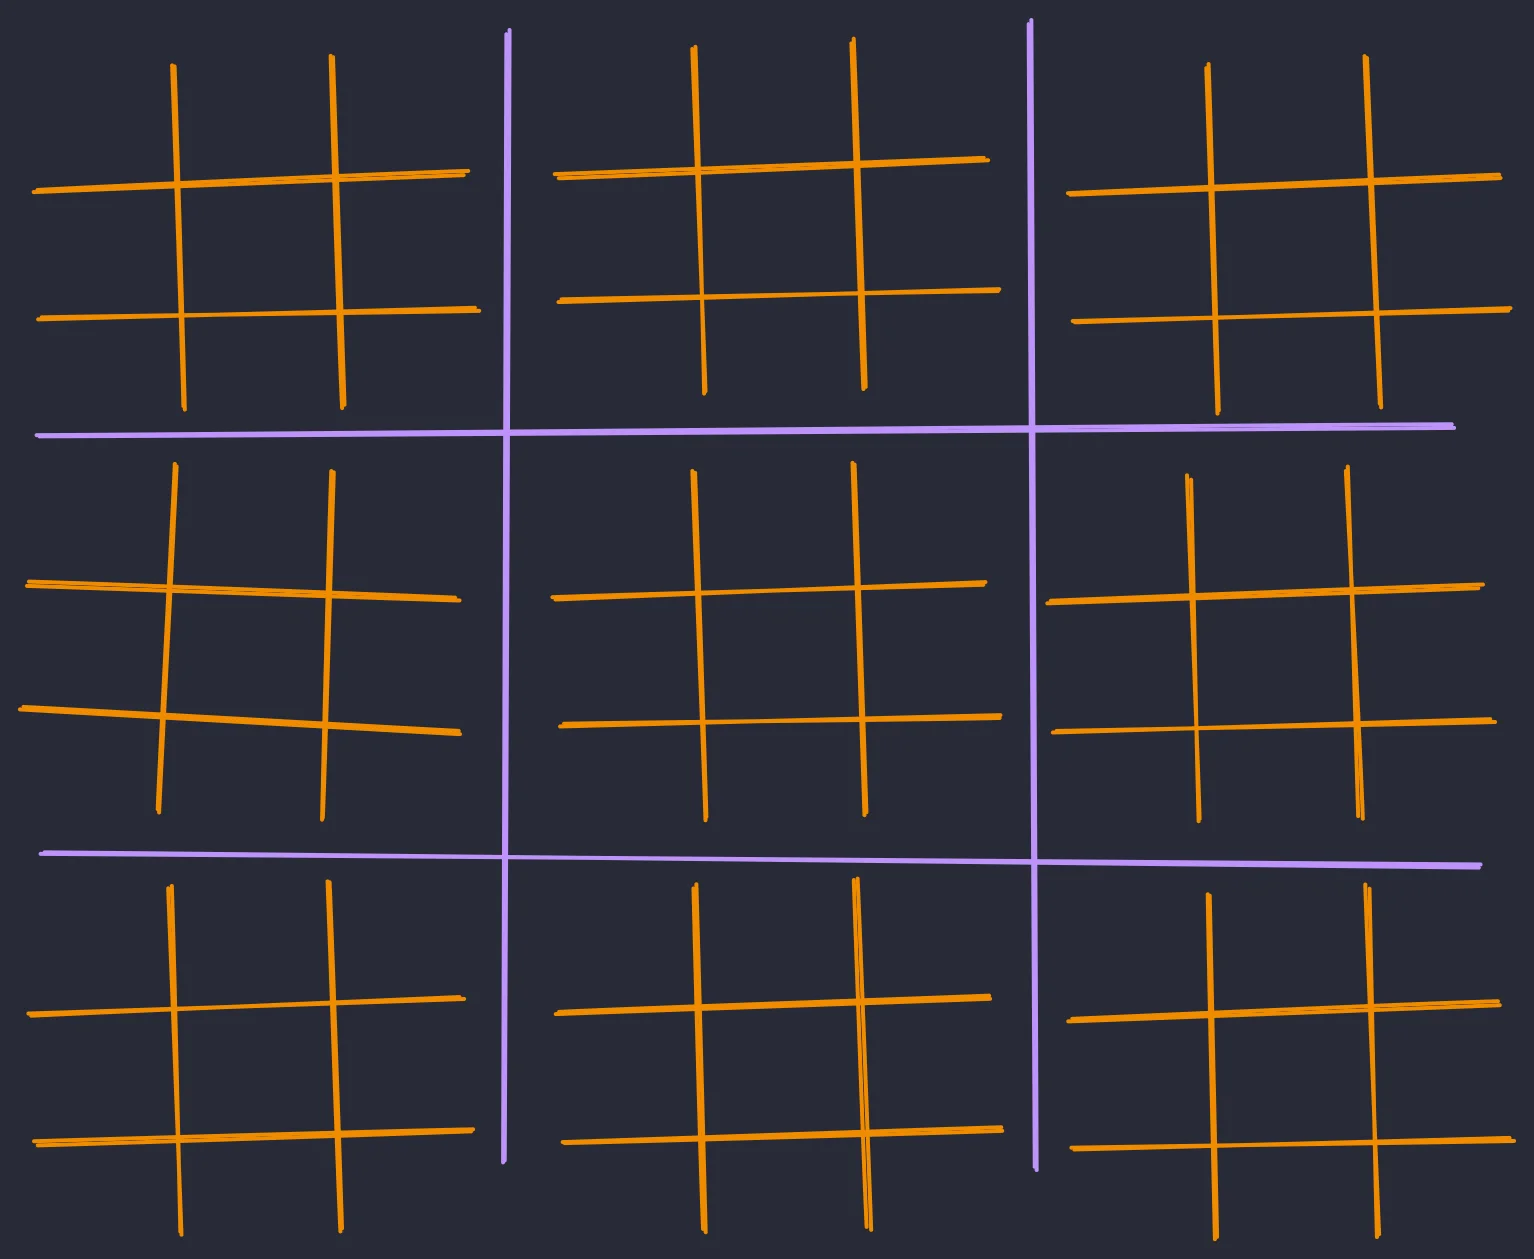 A meta tic-tac-toe game board which is a large tic-tac-toe board which contains nine smaller tic-tac-toe boards, one in each cell of the bigger board.